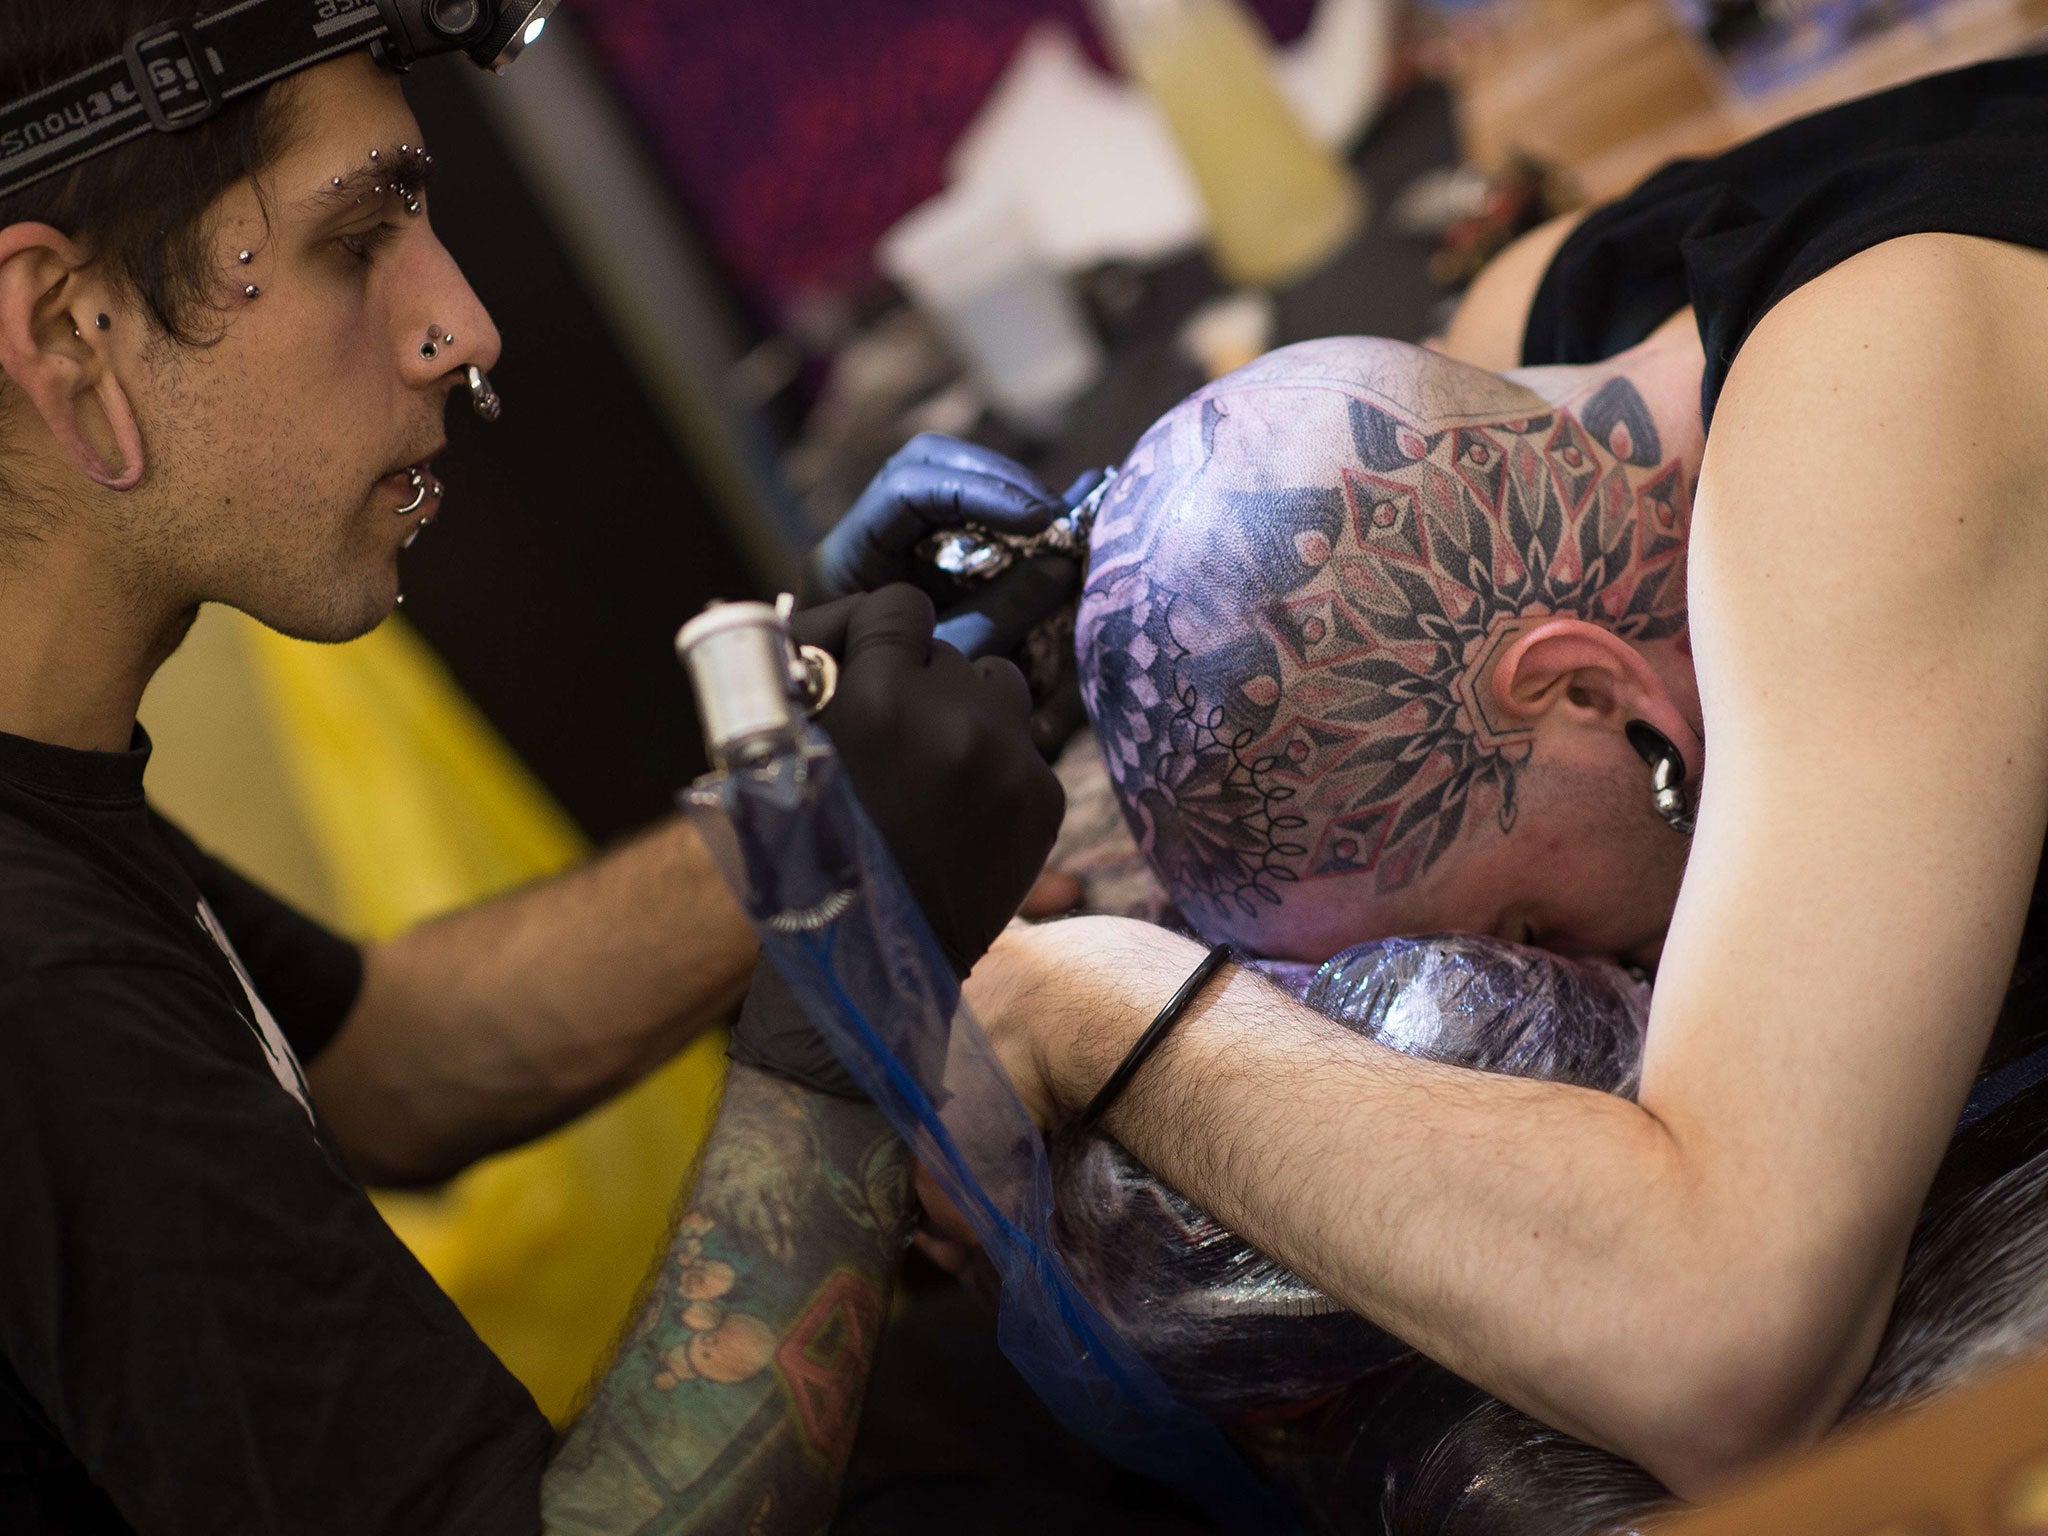 Tattoo trend blamed for 40% drop in blood donations